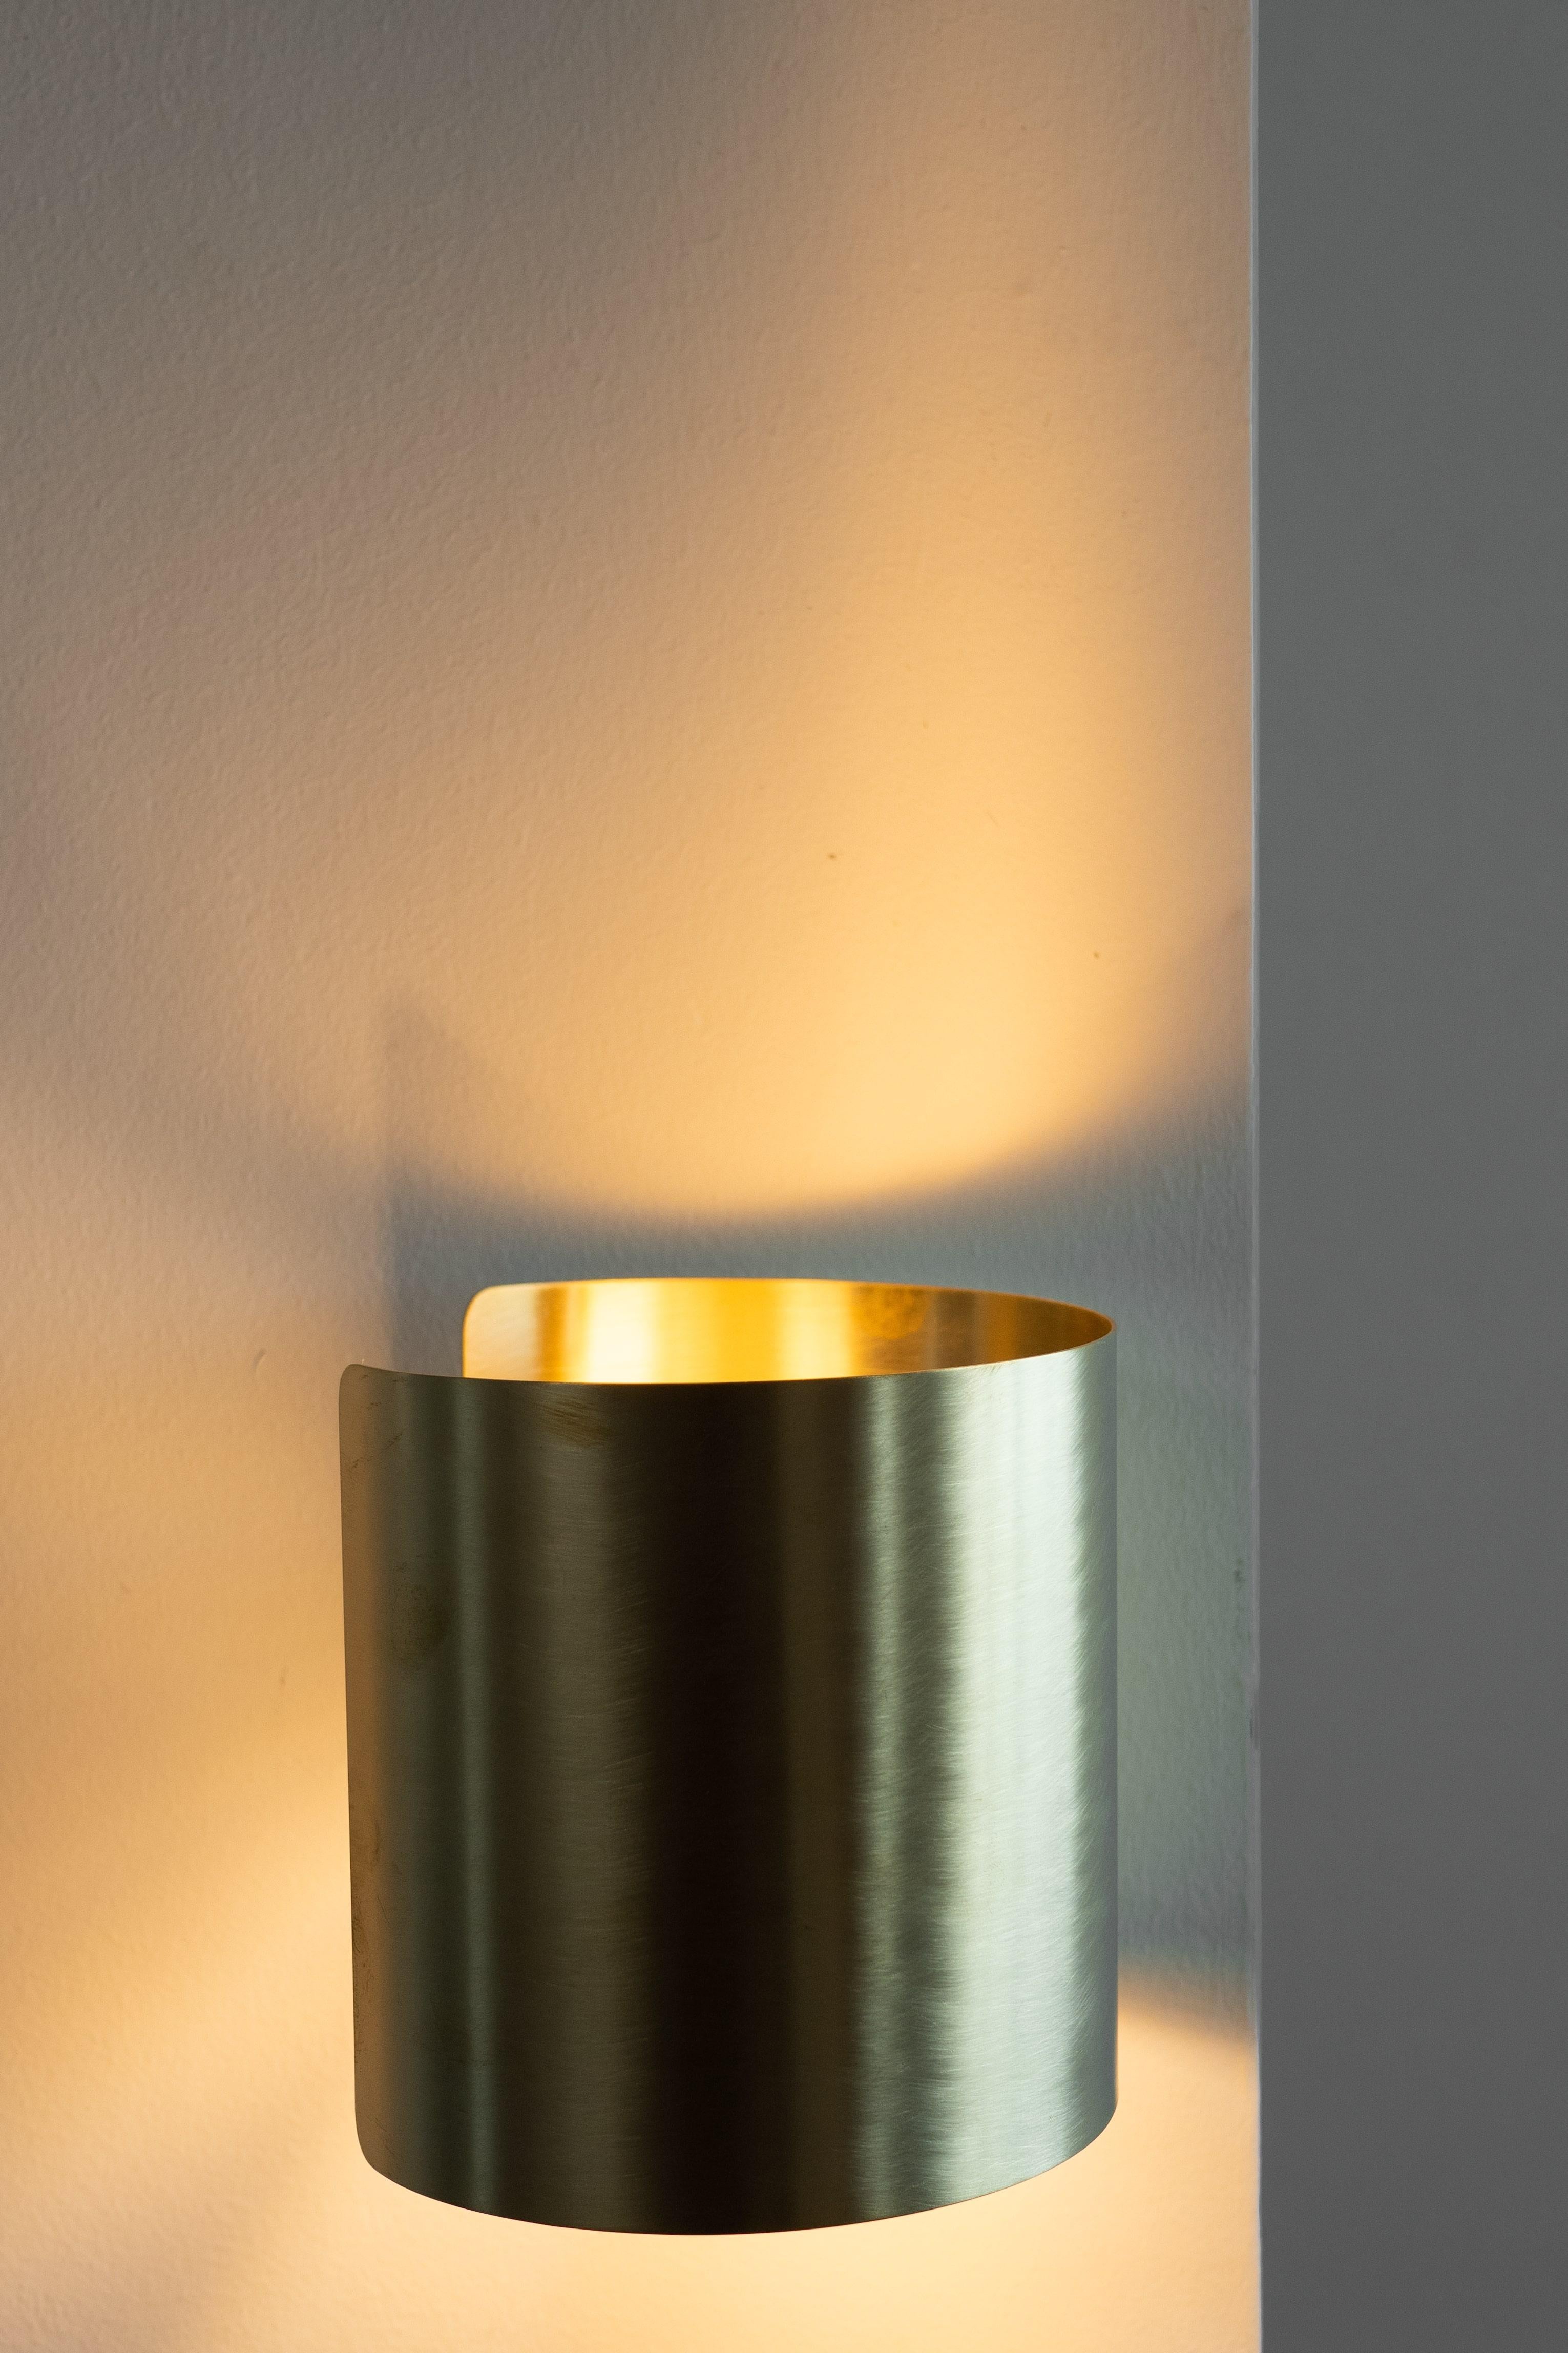 Italian Natural Brass Contemporary-Modern Decorative Wall Light Handcrafted in Italy For Sale